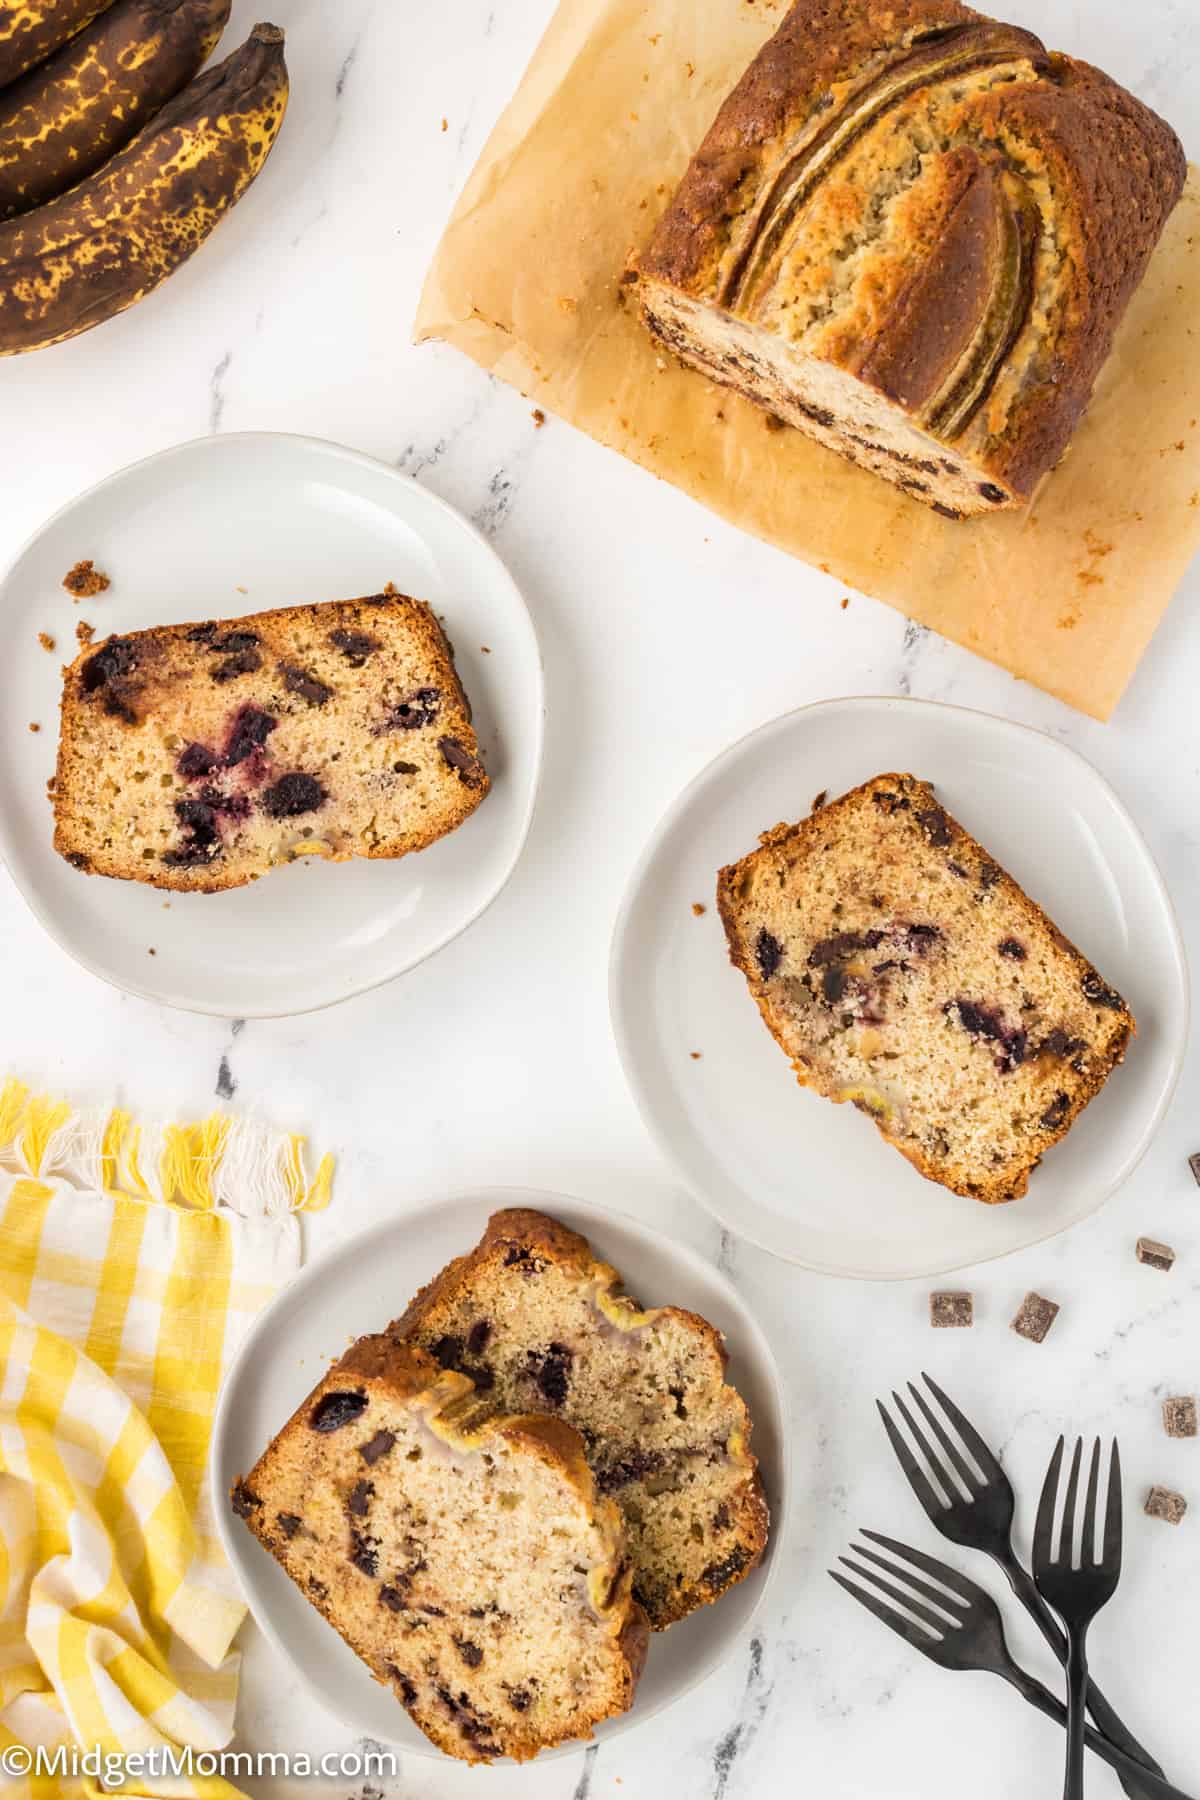 3 plates with slices of Chocolate Cherry Banana Bread